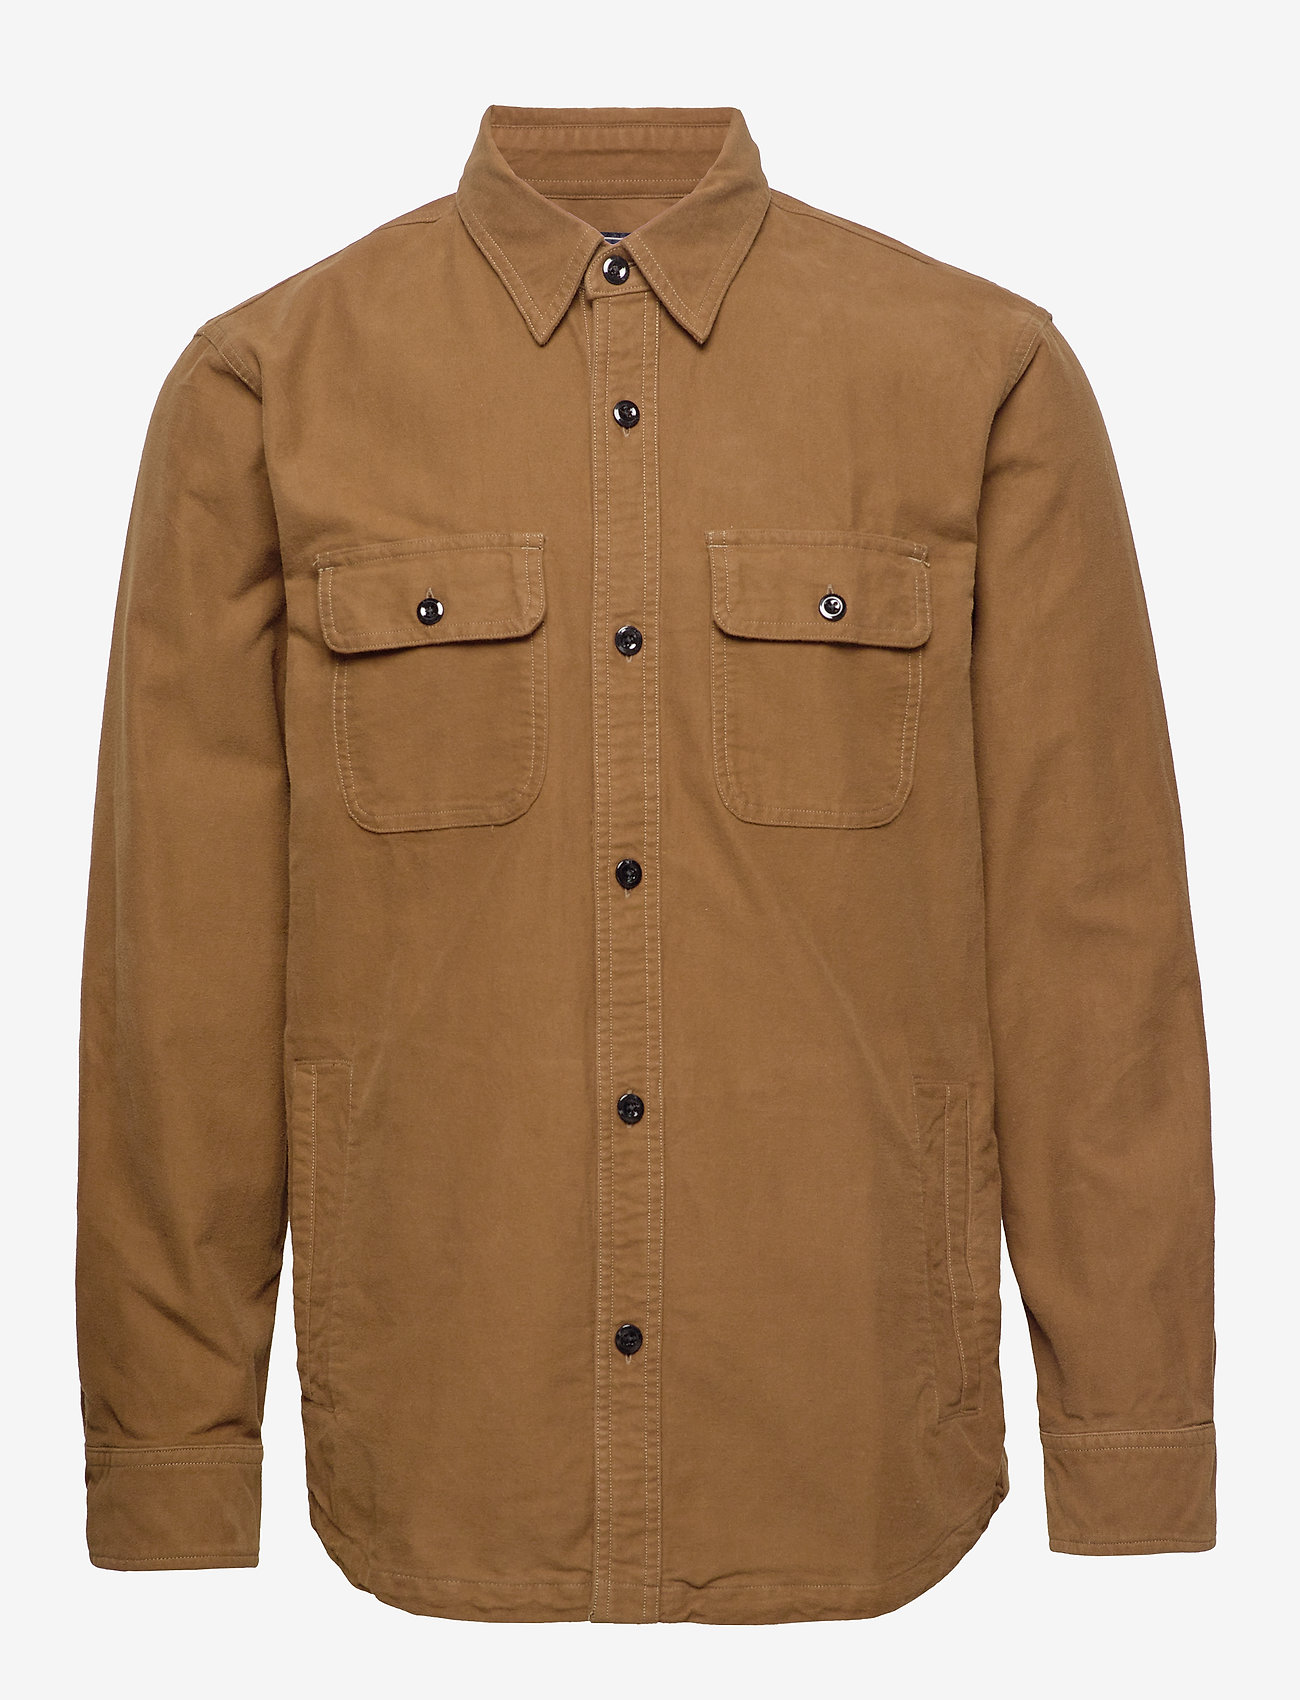 abercrombie & fitch shirt jacket